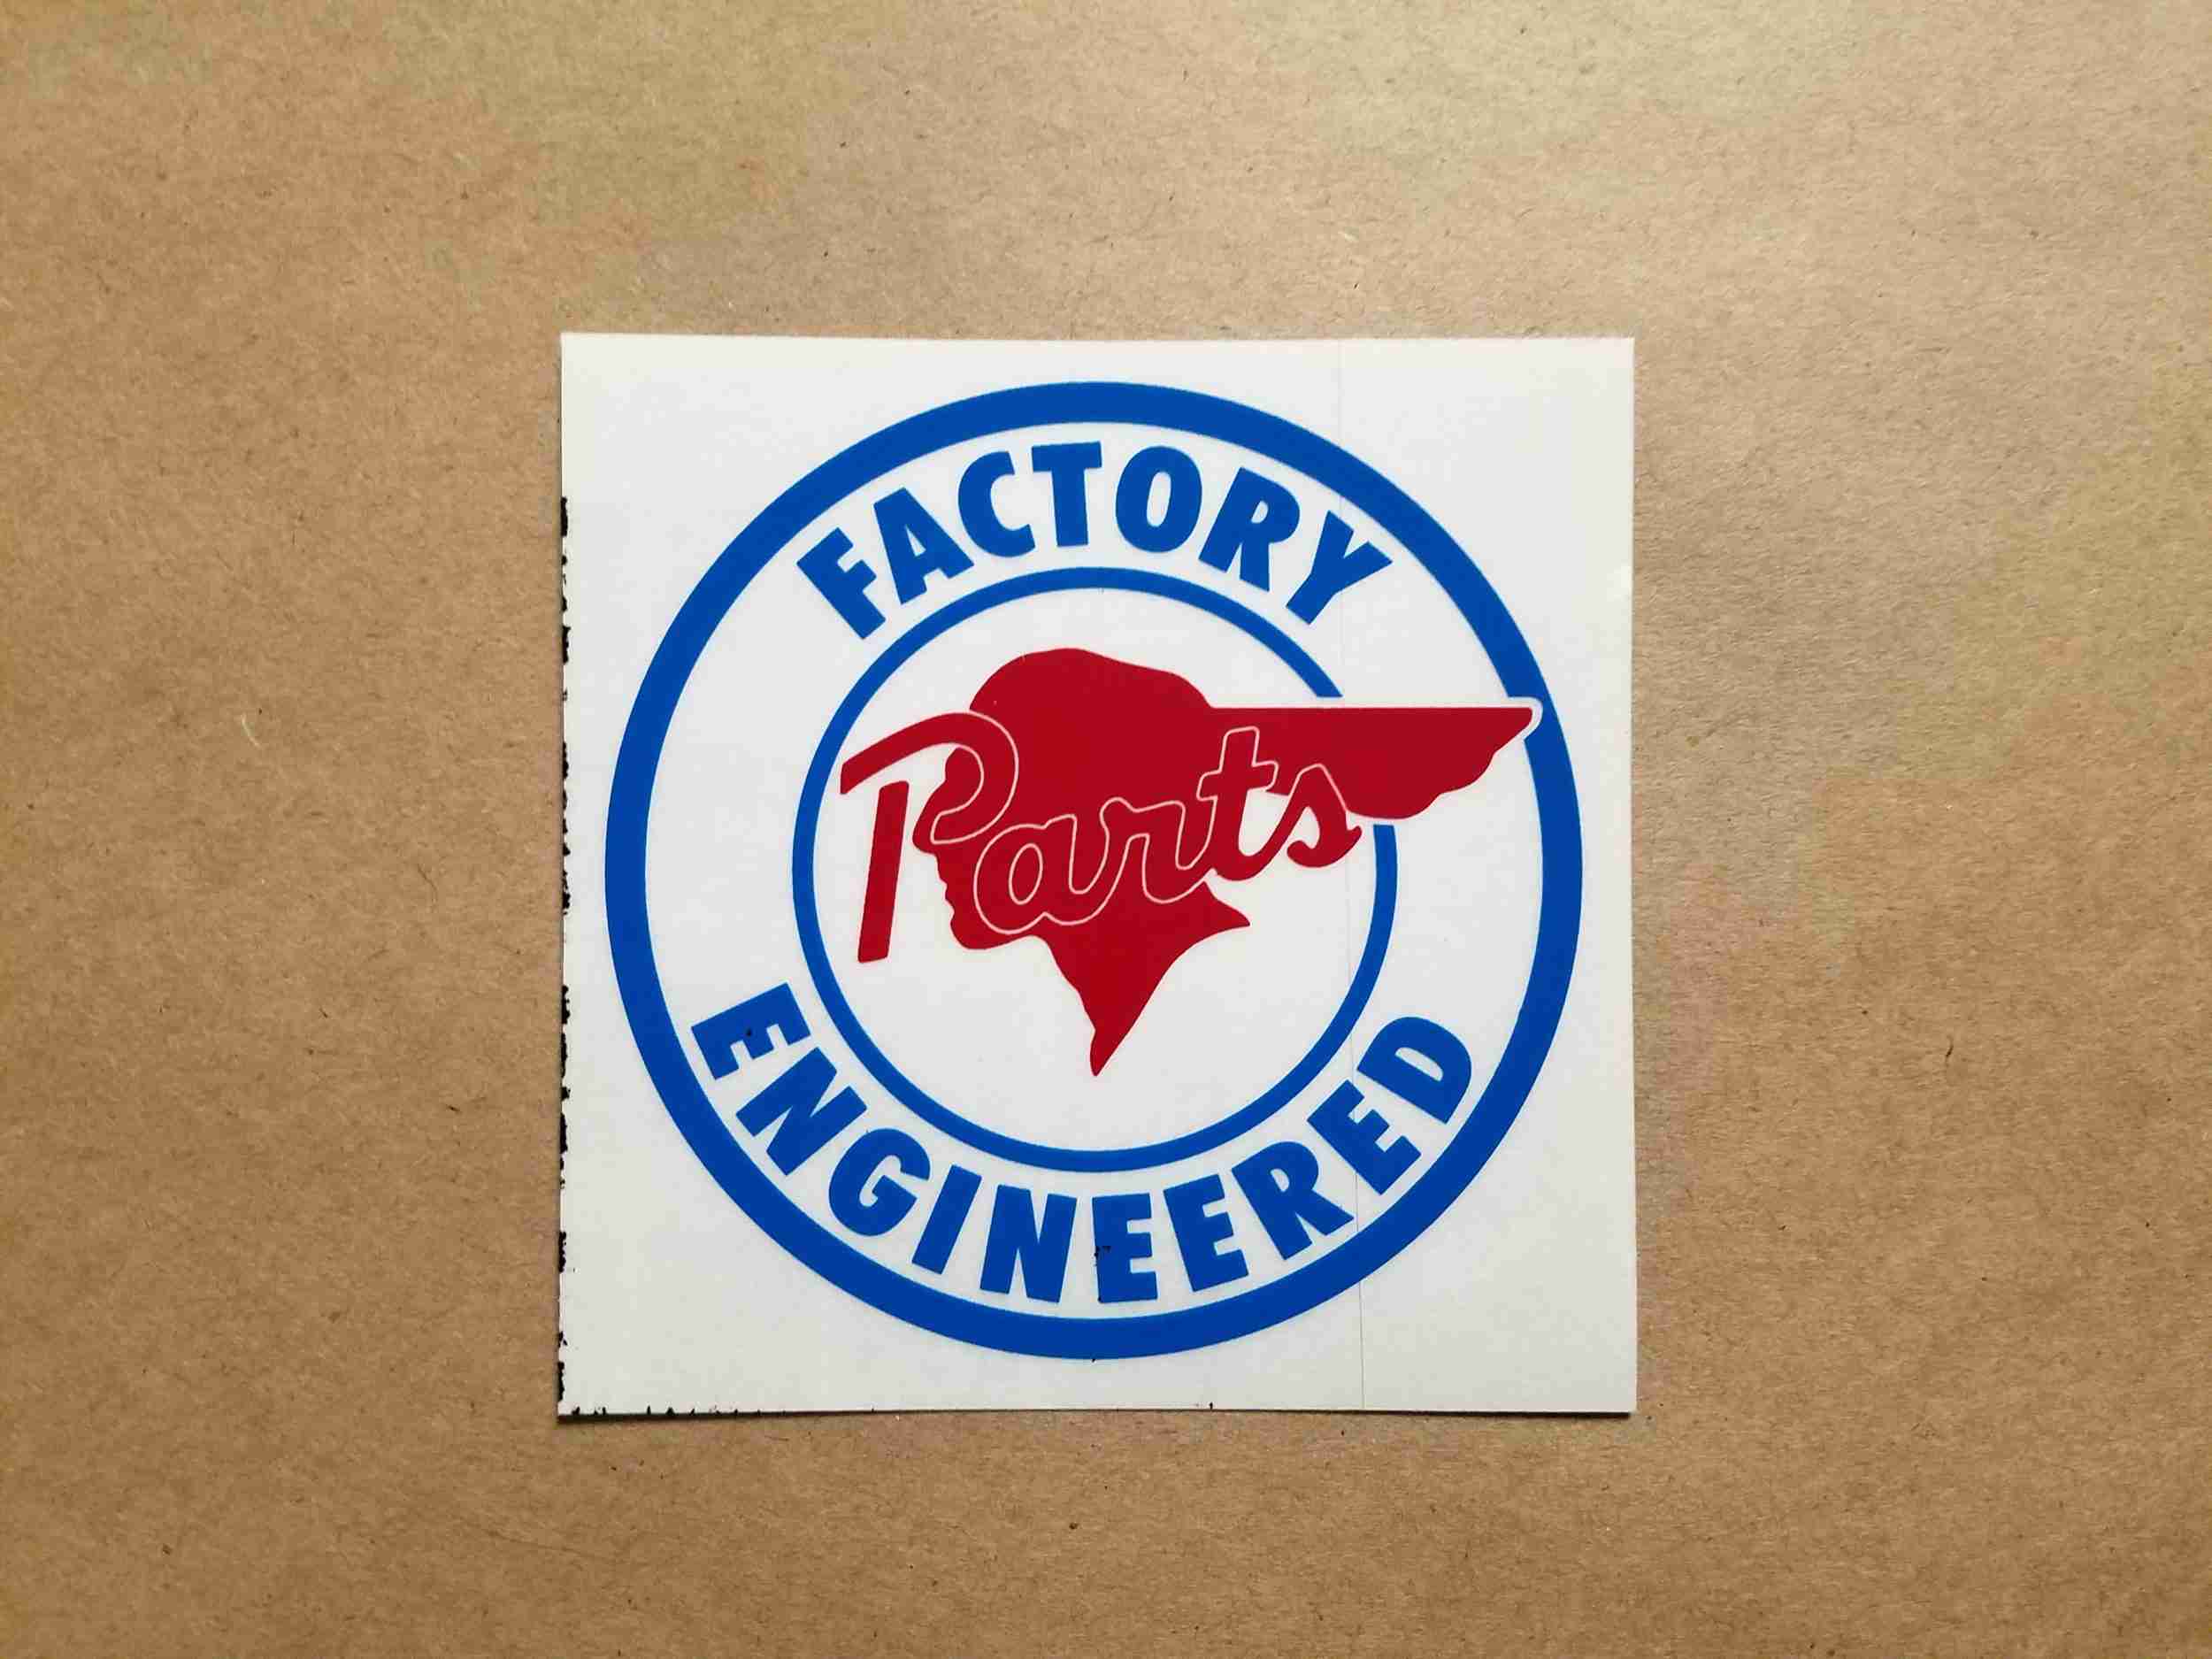 1926-58 Indian Head "Factory Engineered Parts" Decal